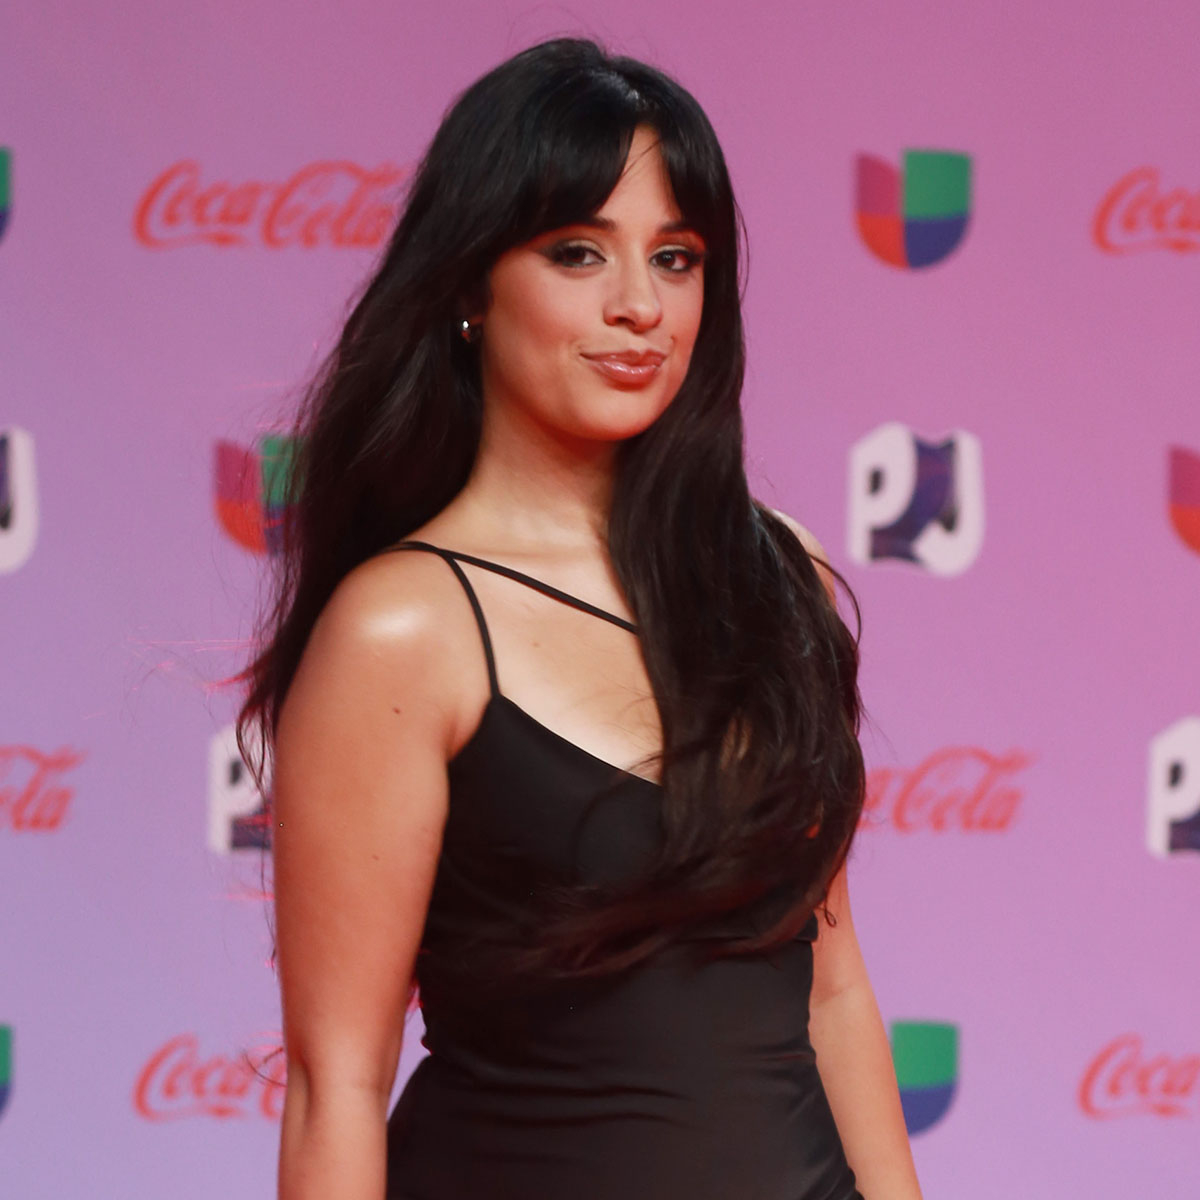 Camila Cabello Reveals Secret To Her Natural Curly Hair